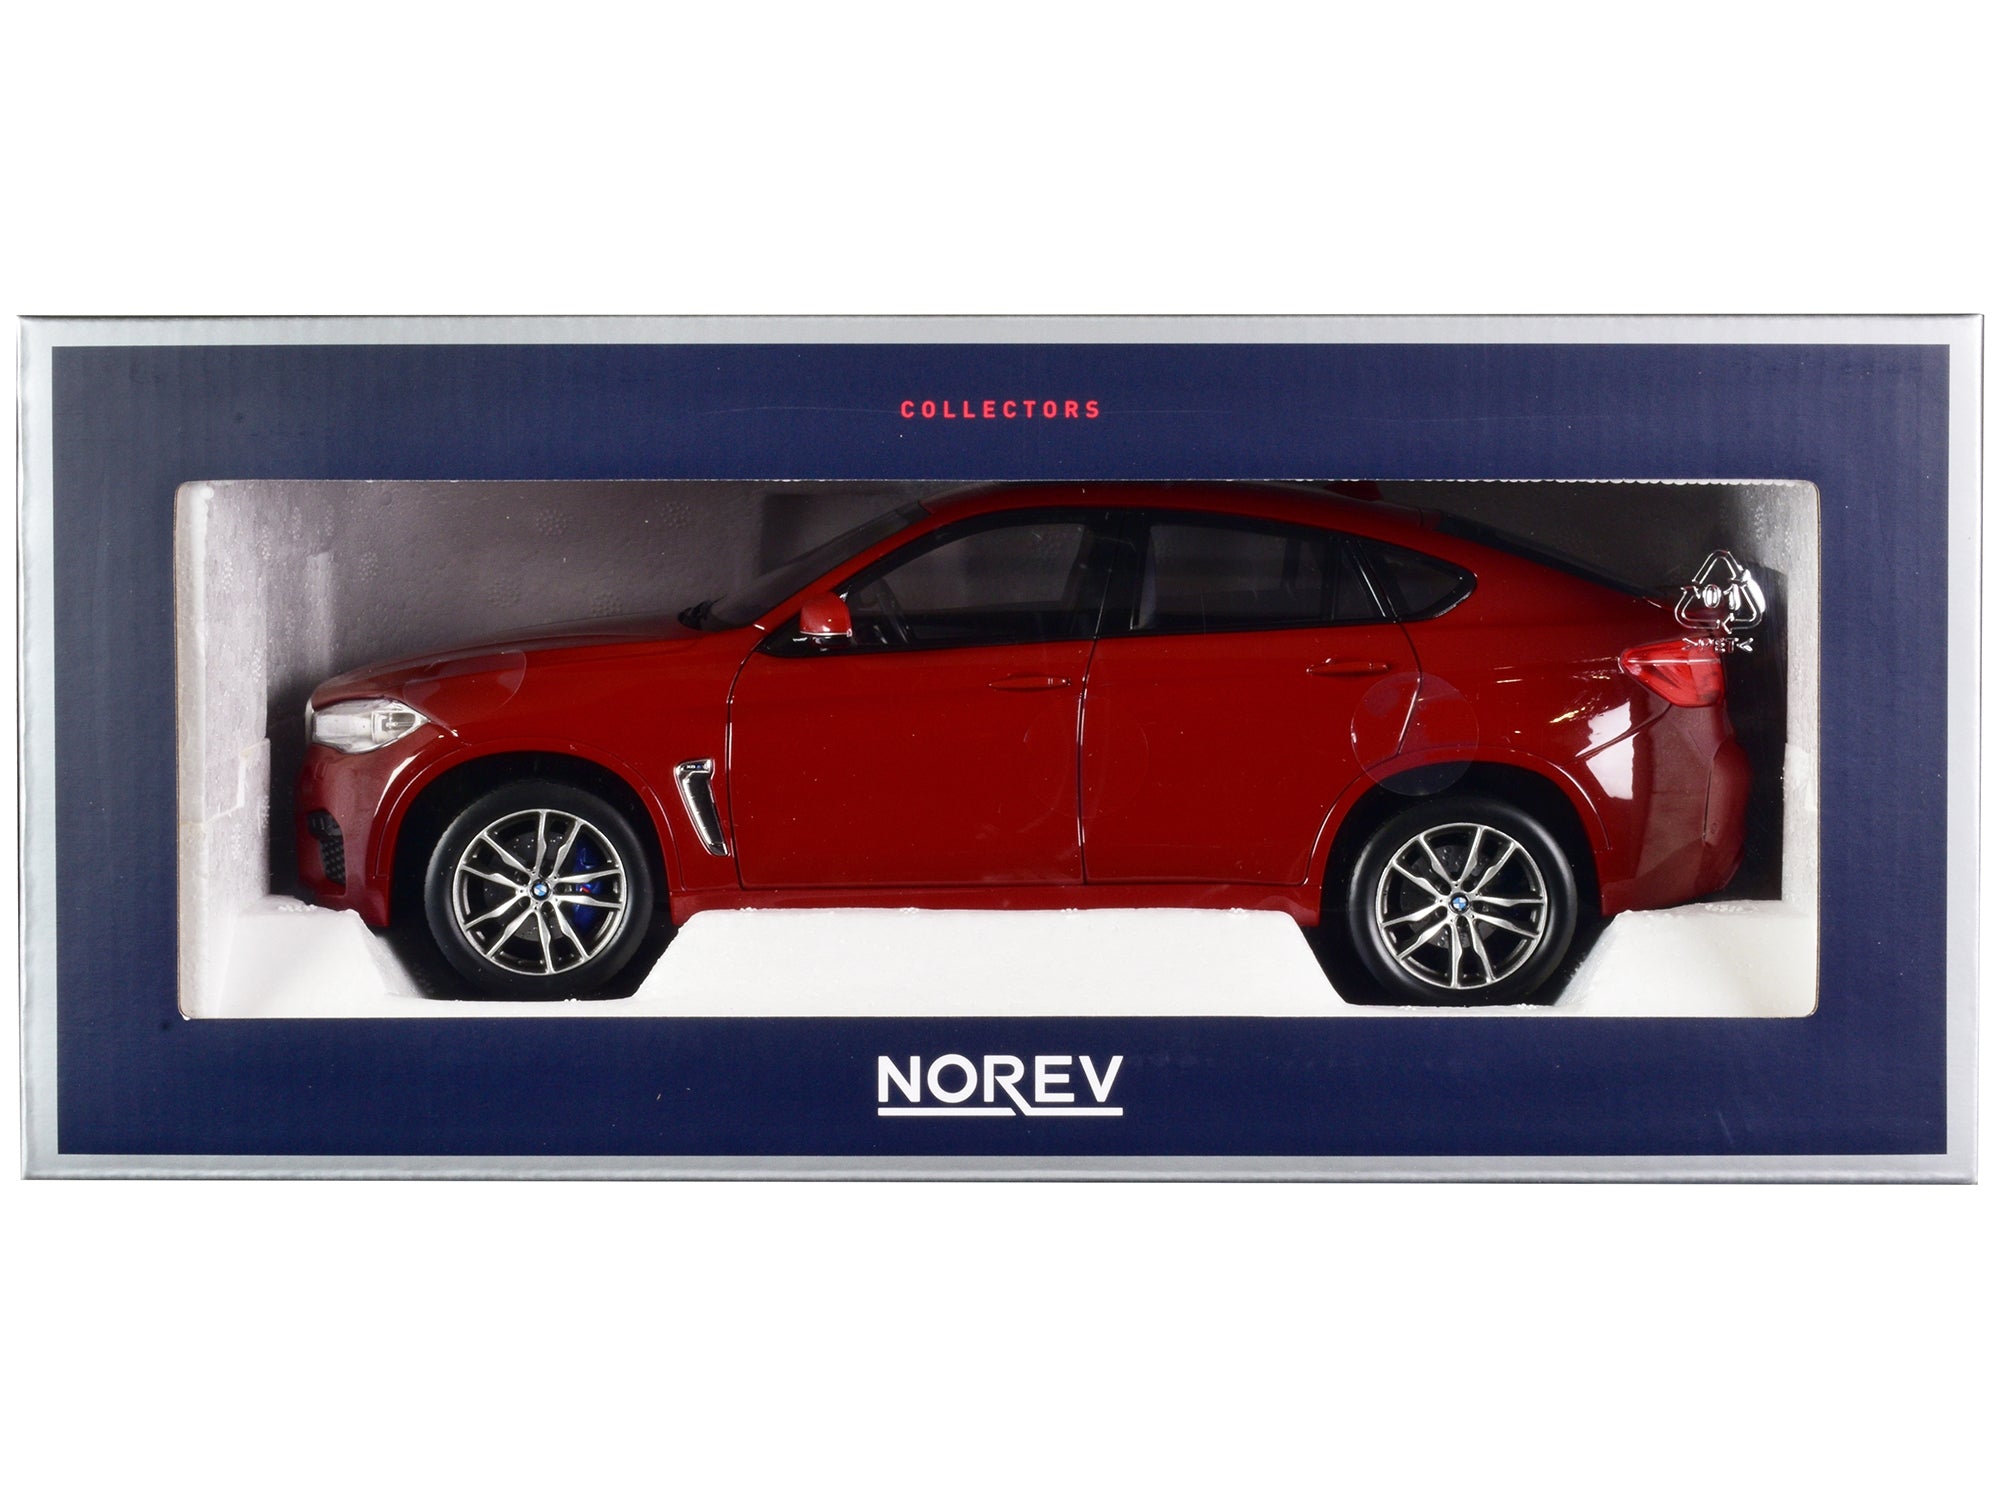 2015 BMW X6 M Red Metallic with Sunroof 1/18 Diecast Model Car by Norev Norev